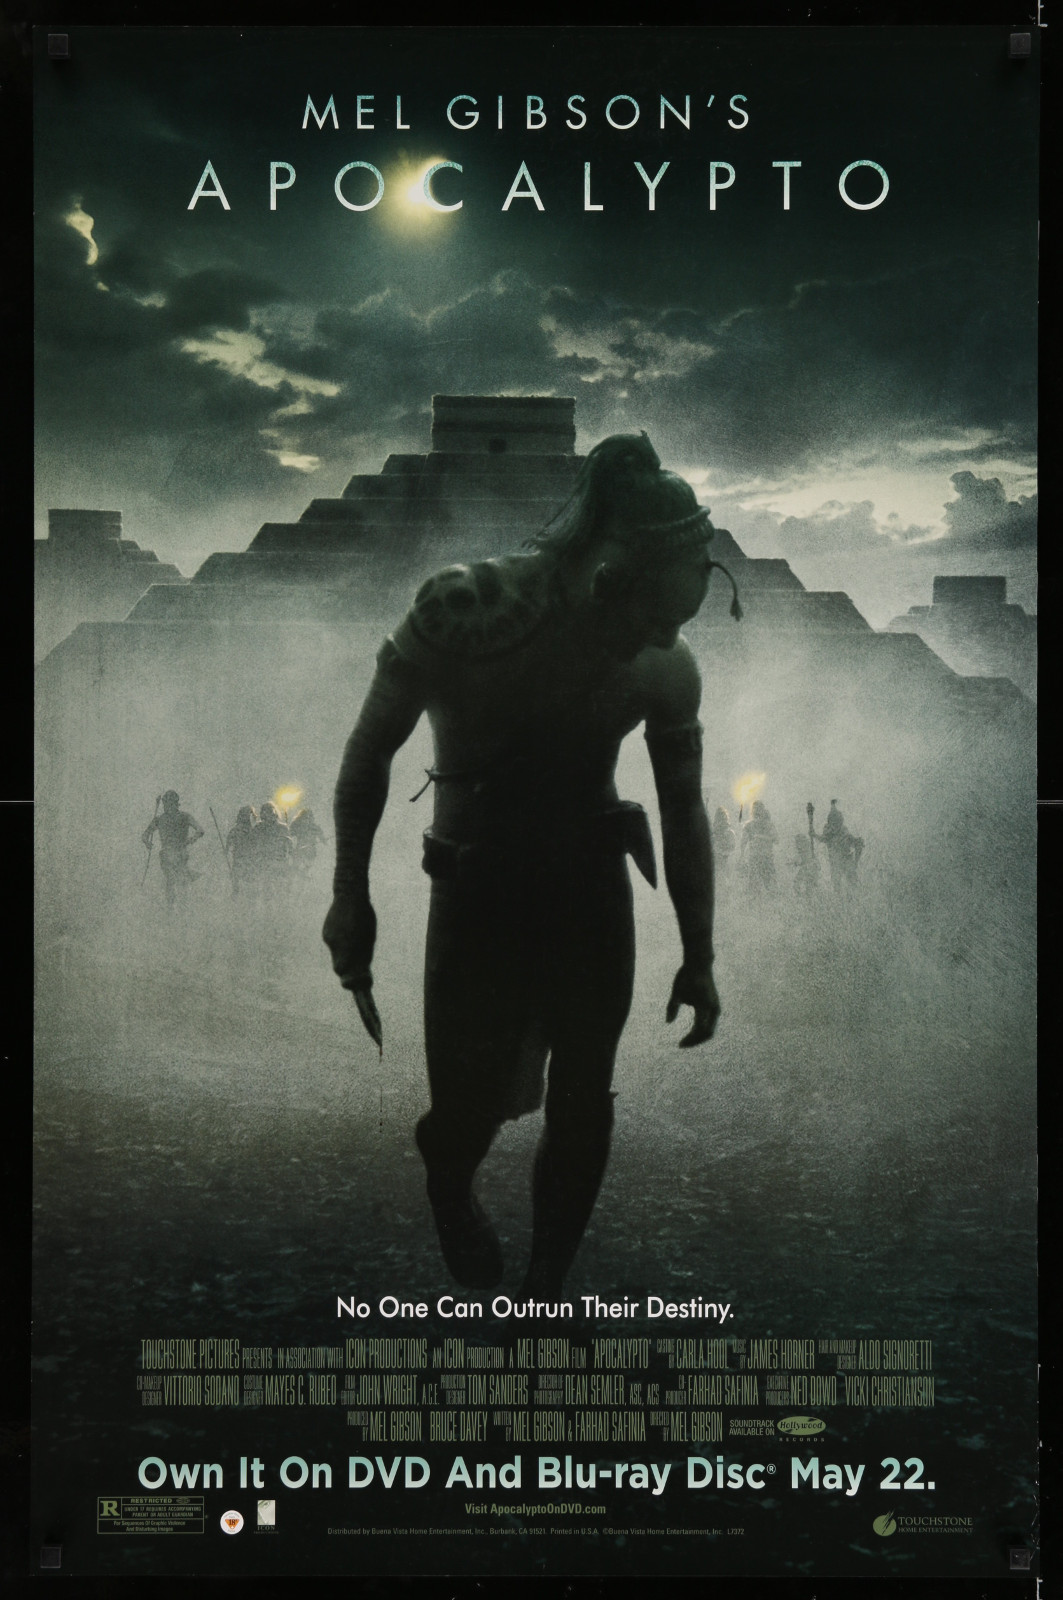 Apocalypto 2A327 A Part Of A Lot 10 Unfolded Video And Special Posters '80S-00S Many Great Movie Images!